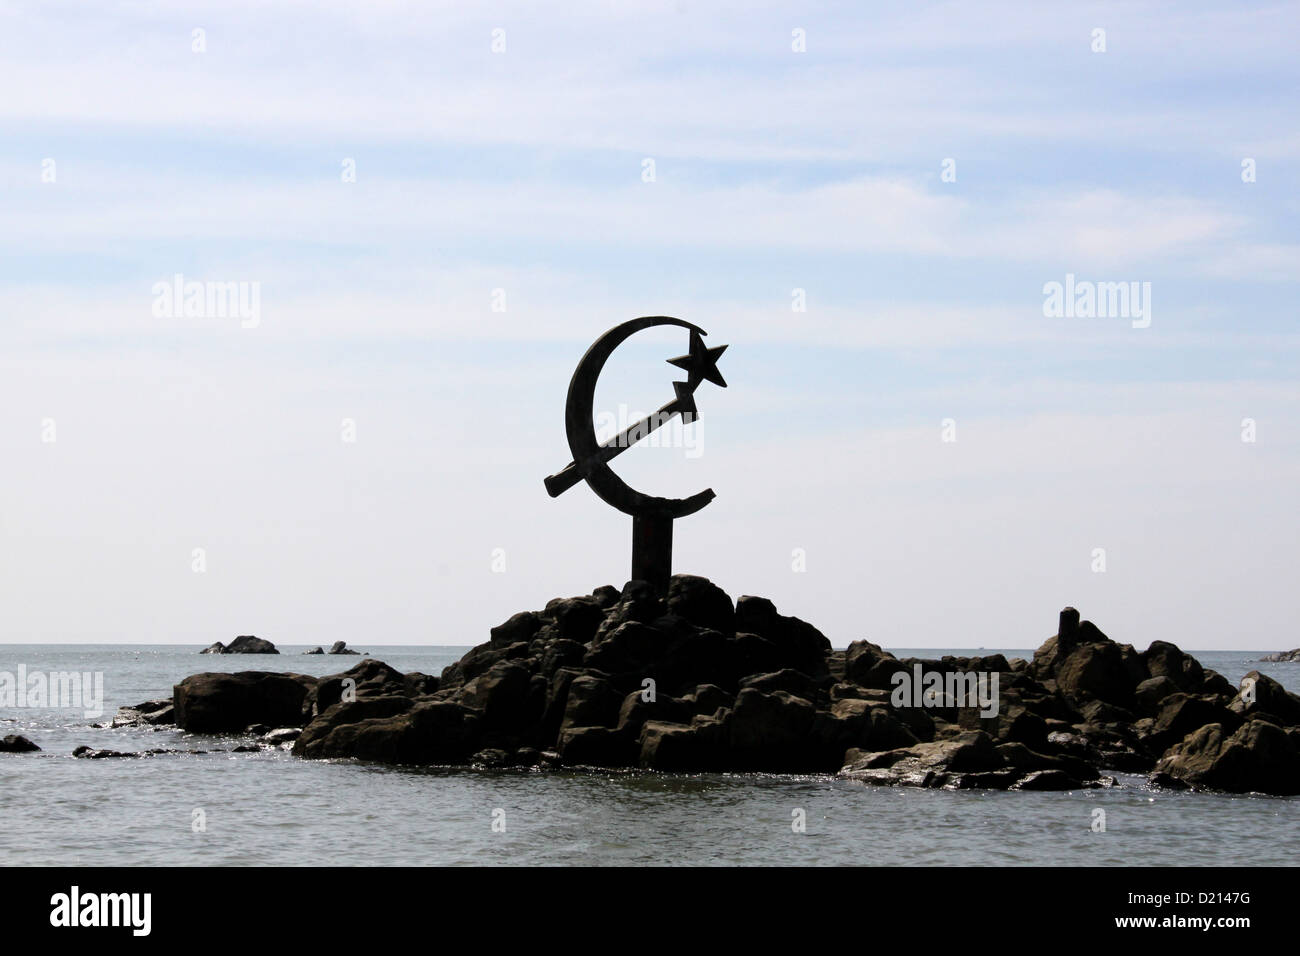 Silhouette communist symbol on a rock surrounded by sea Kerala india Communist state Stock Photo